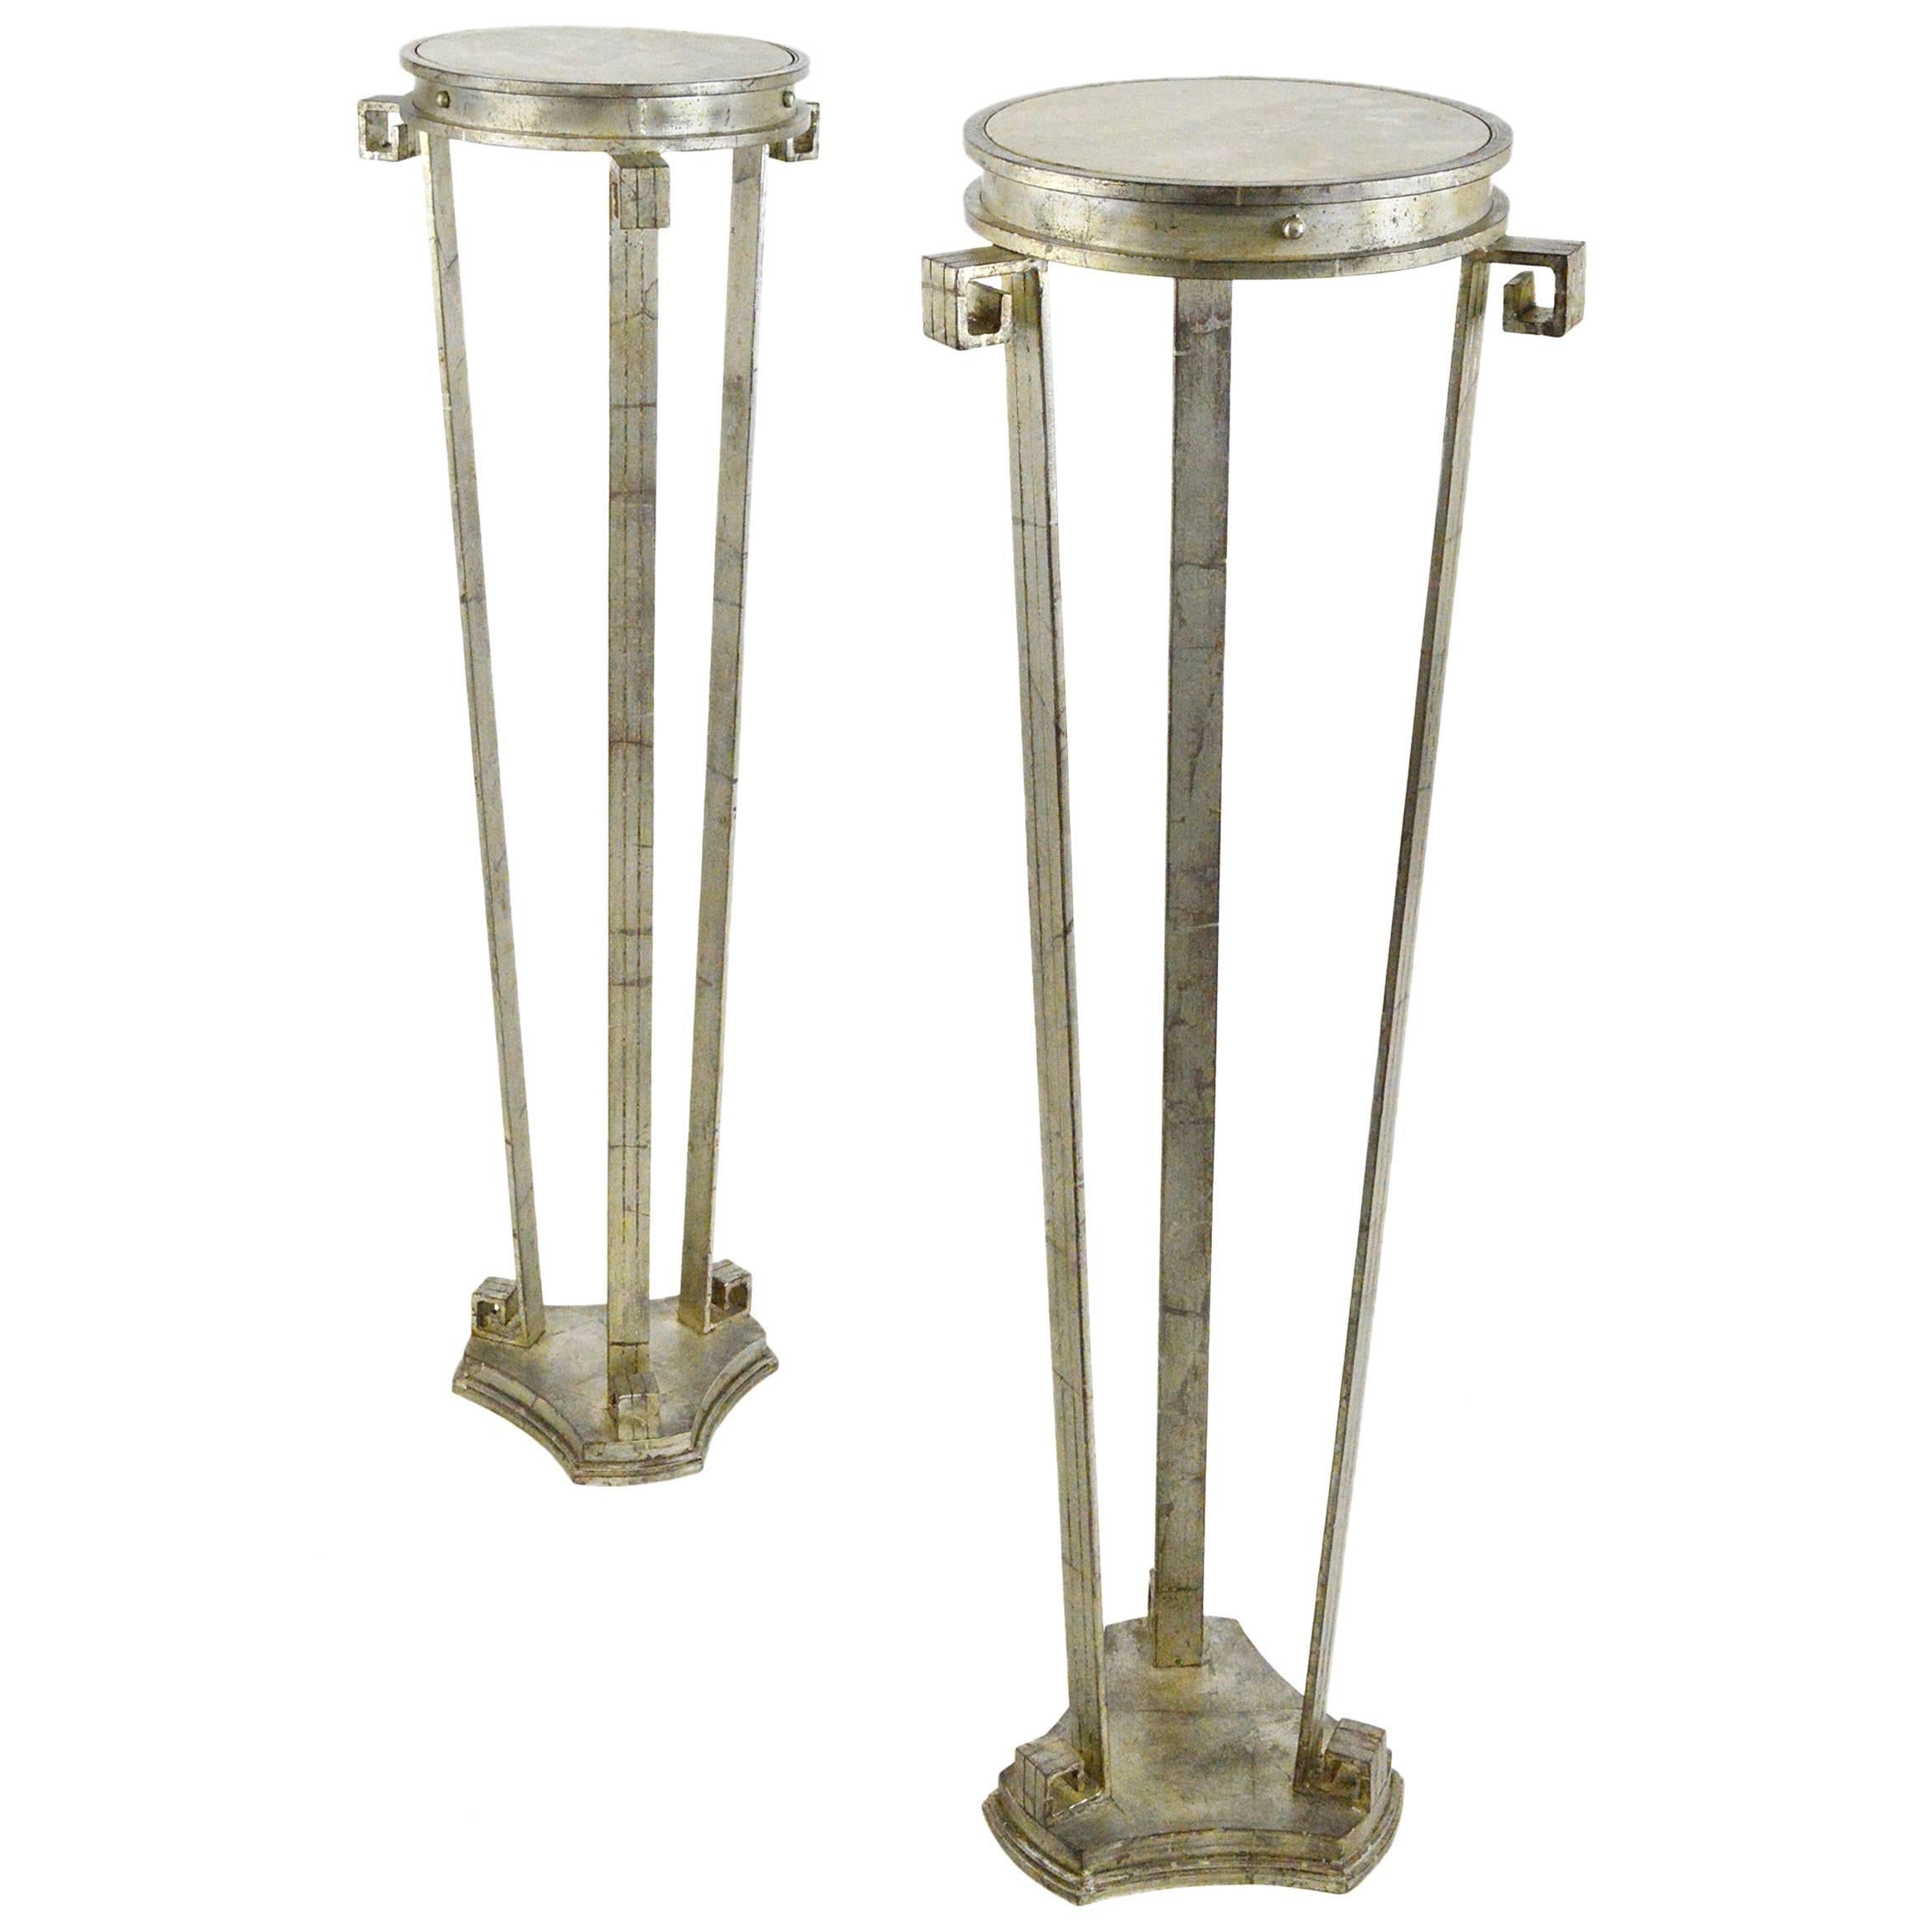 Fantastic Pair of Art Deco Style Silver Leafed Marble-Top Iron Pedestals For Sale